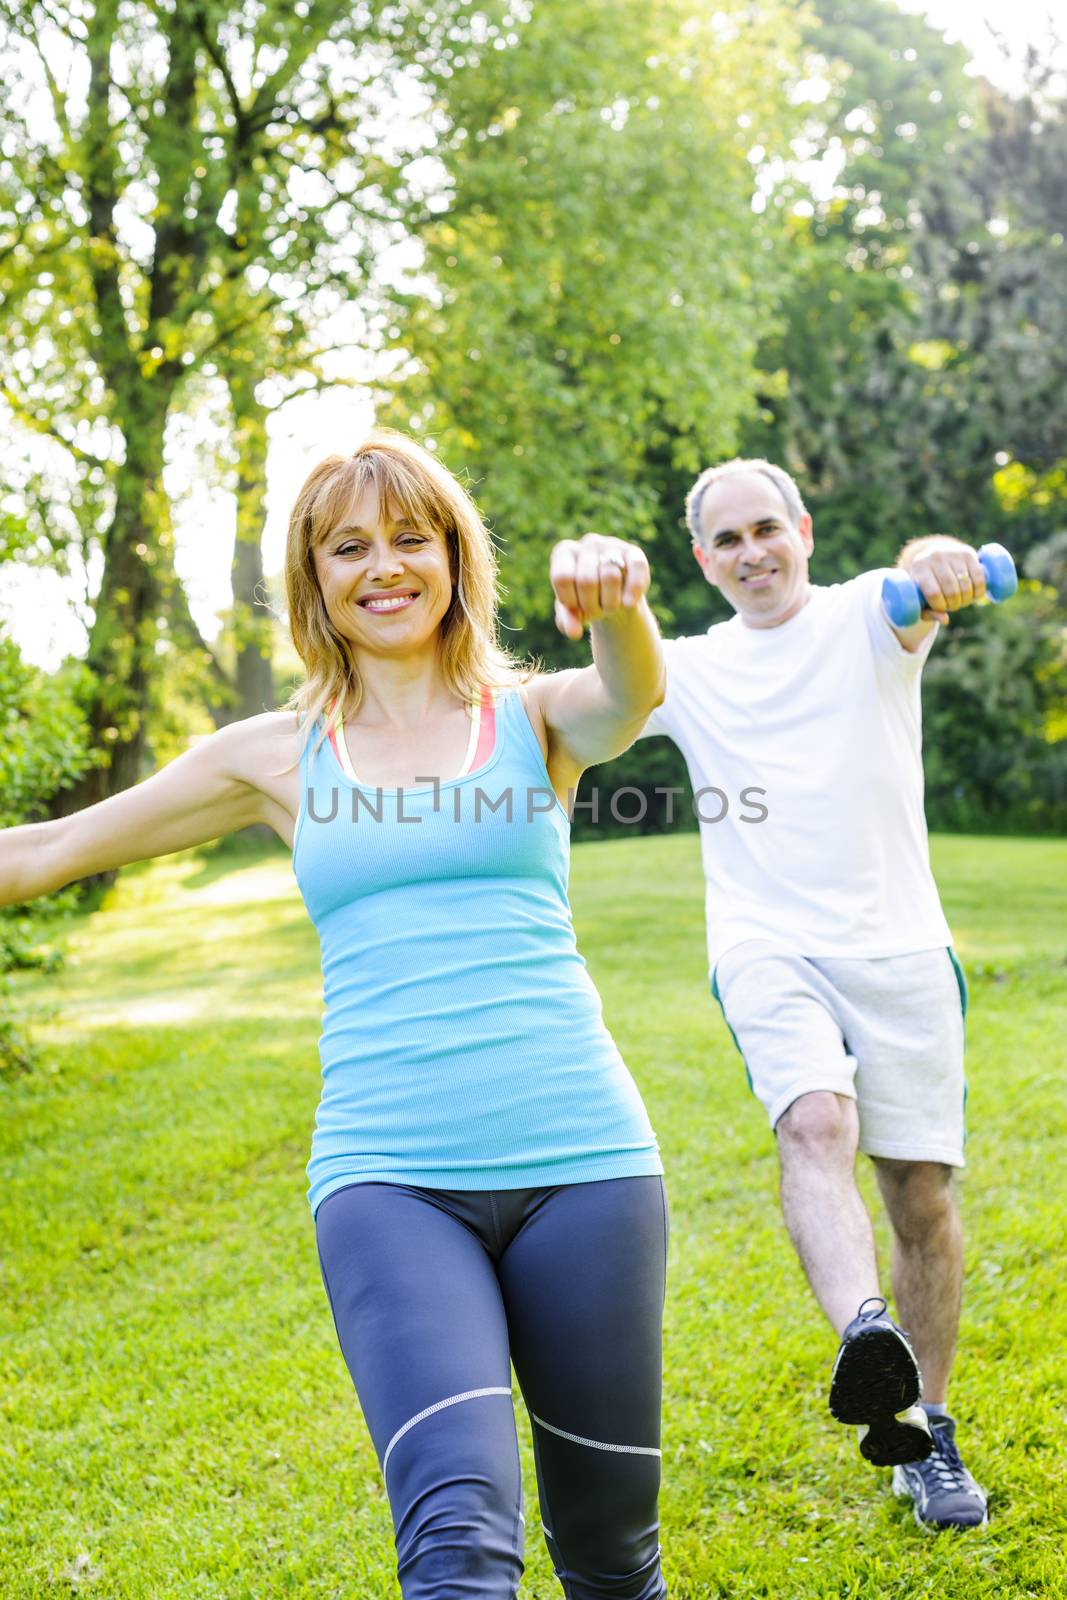 Female fitness instructor exercising with middle aged man outdoors in green park